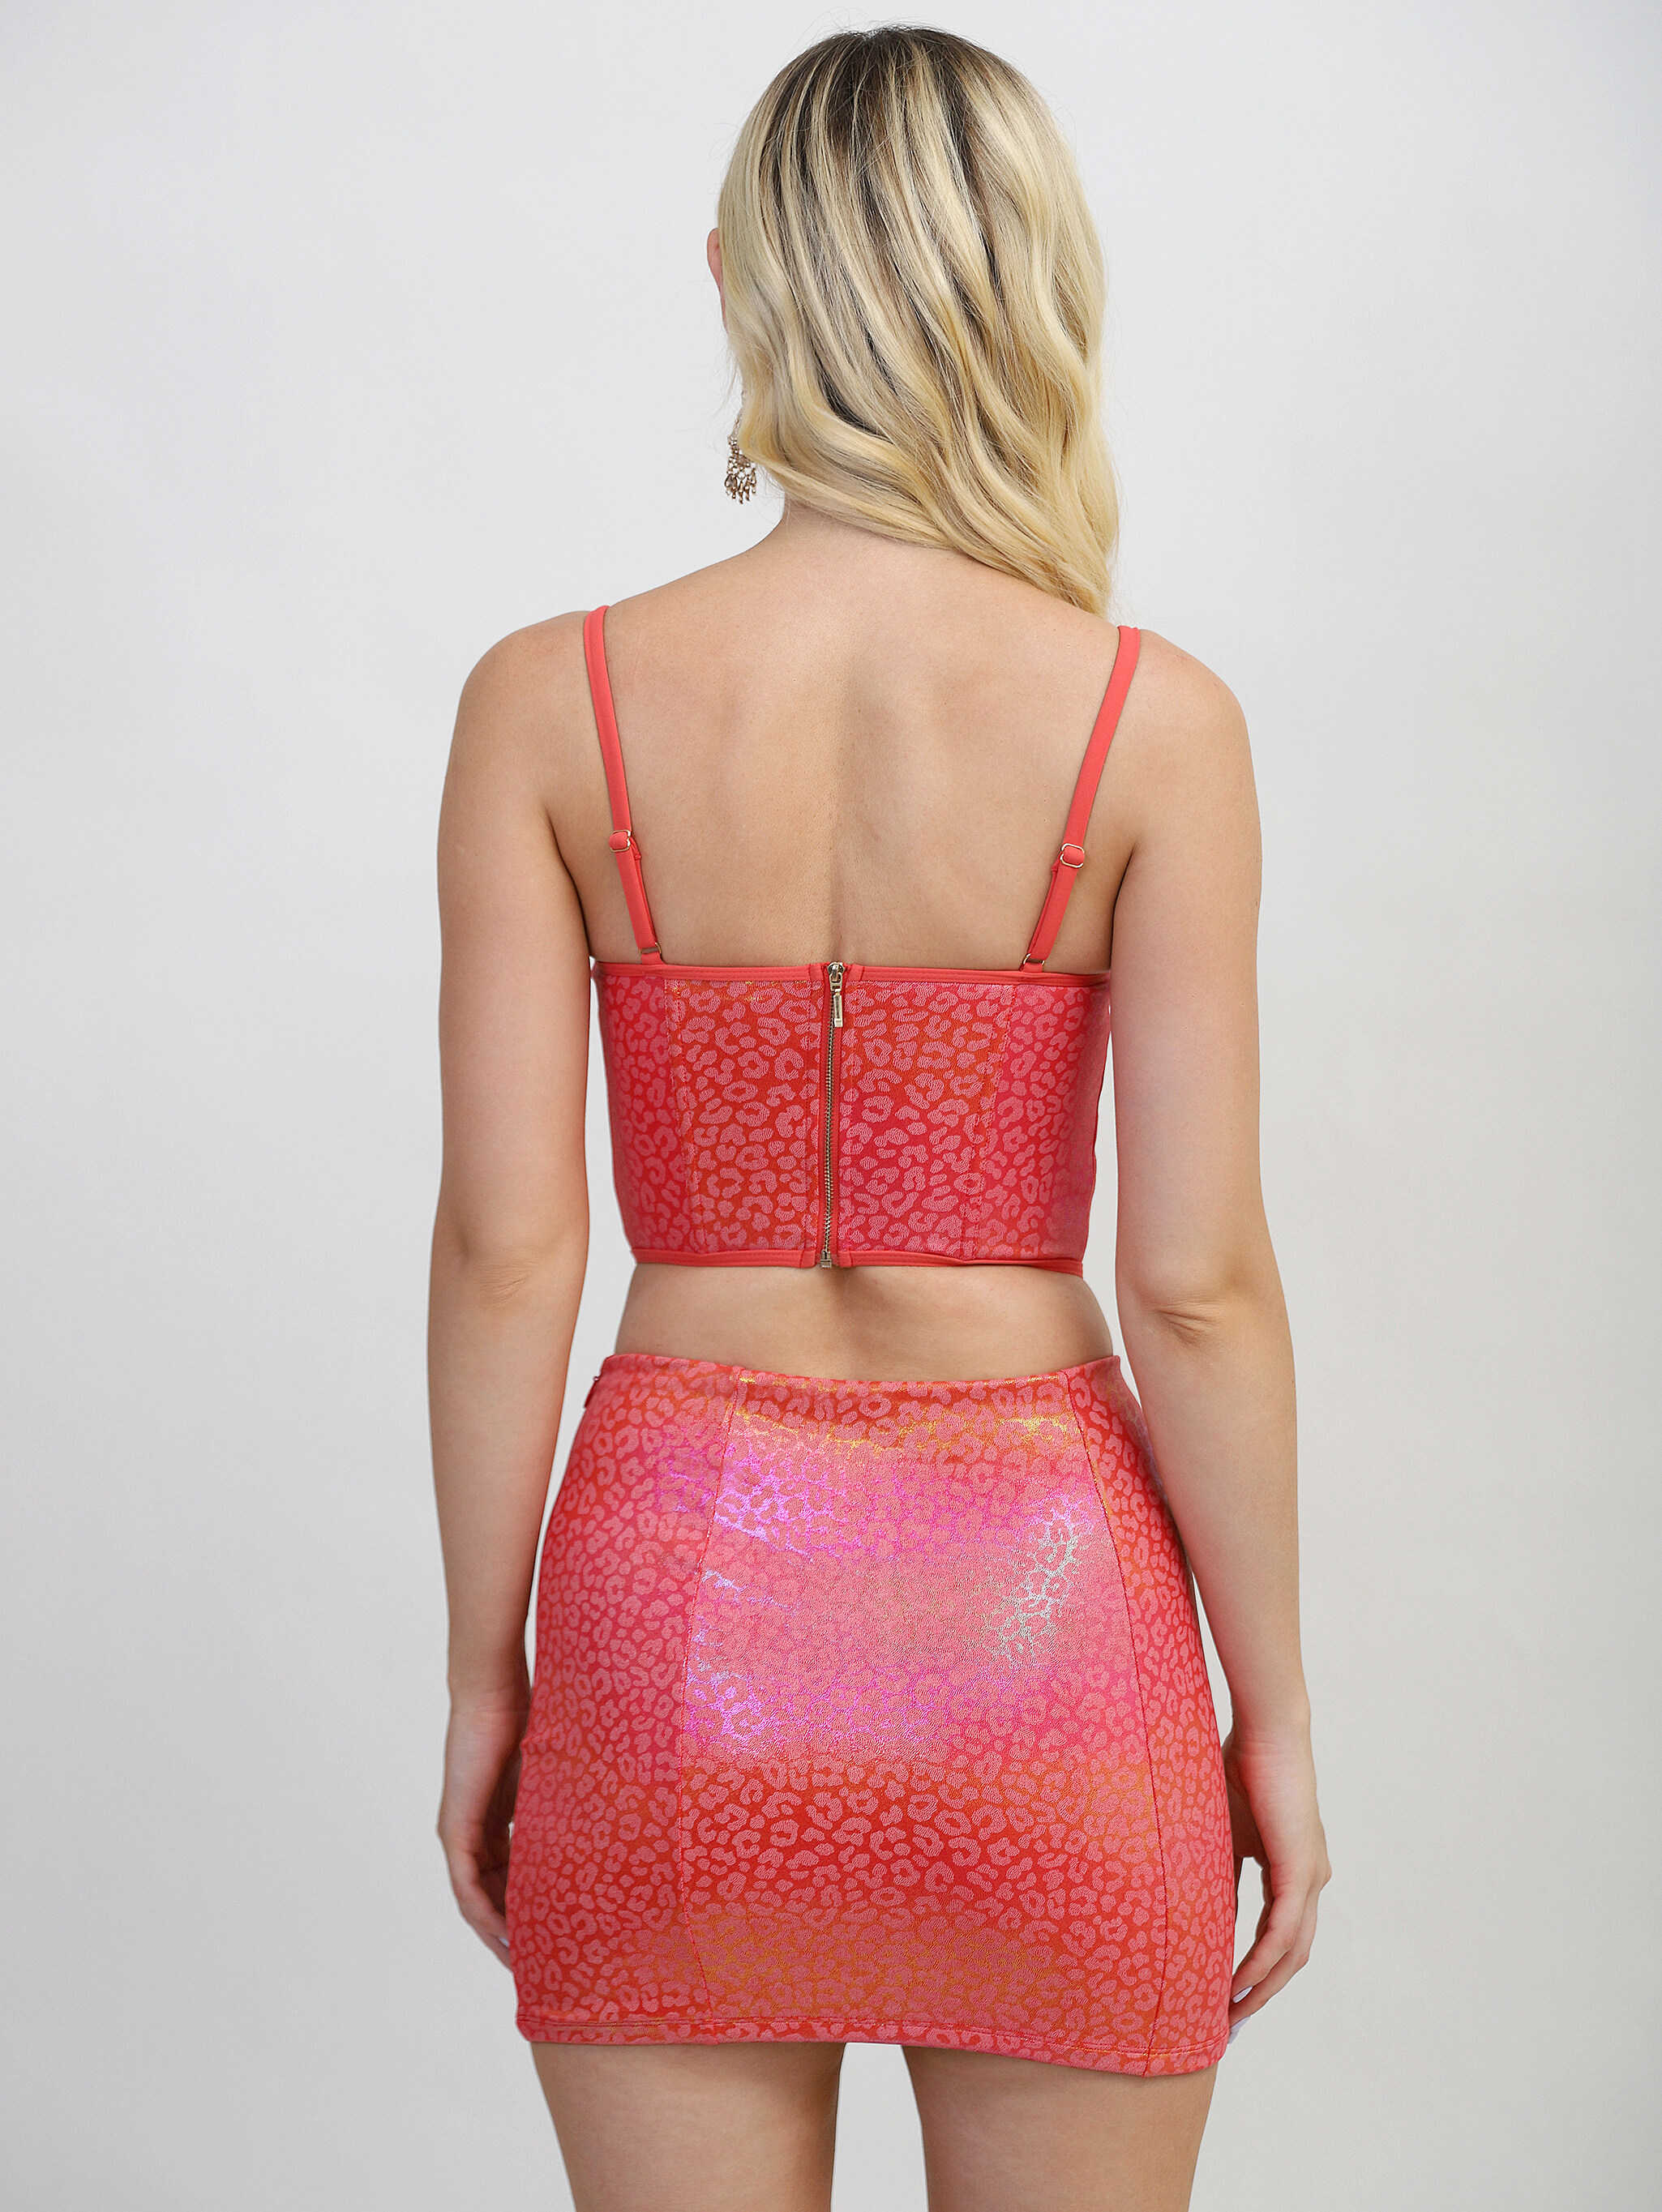 pink underwired corset odm, foiled printed mini skirt manufacturer, foiled printed mini skirt factory, foiled printed mini skirt supplier, underwired mini skirt sourcing